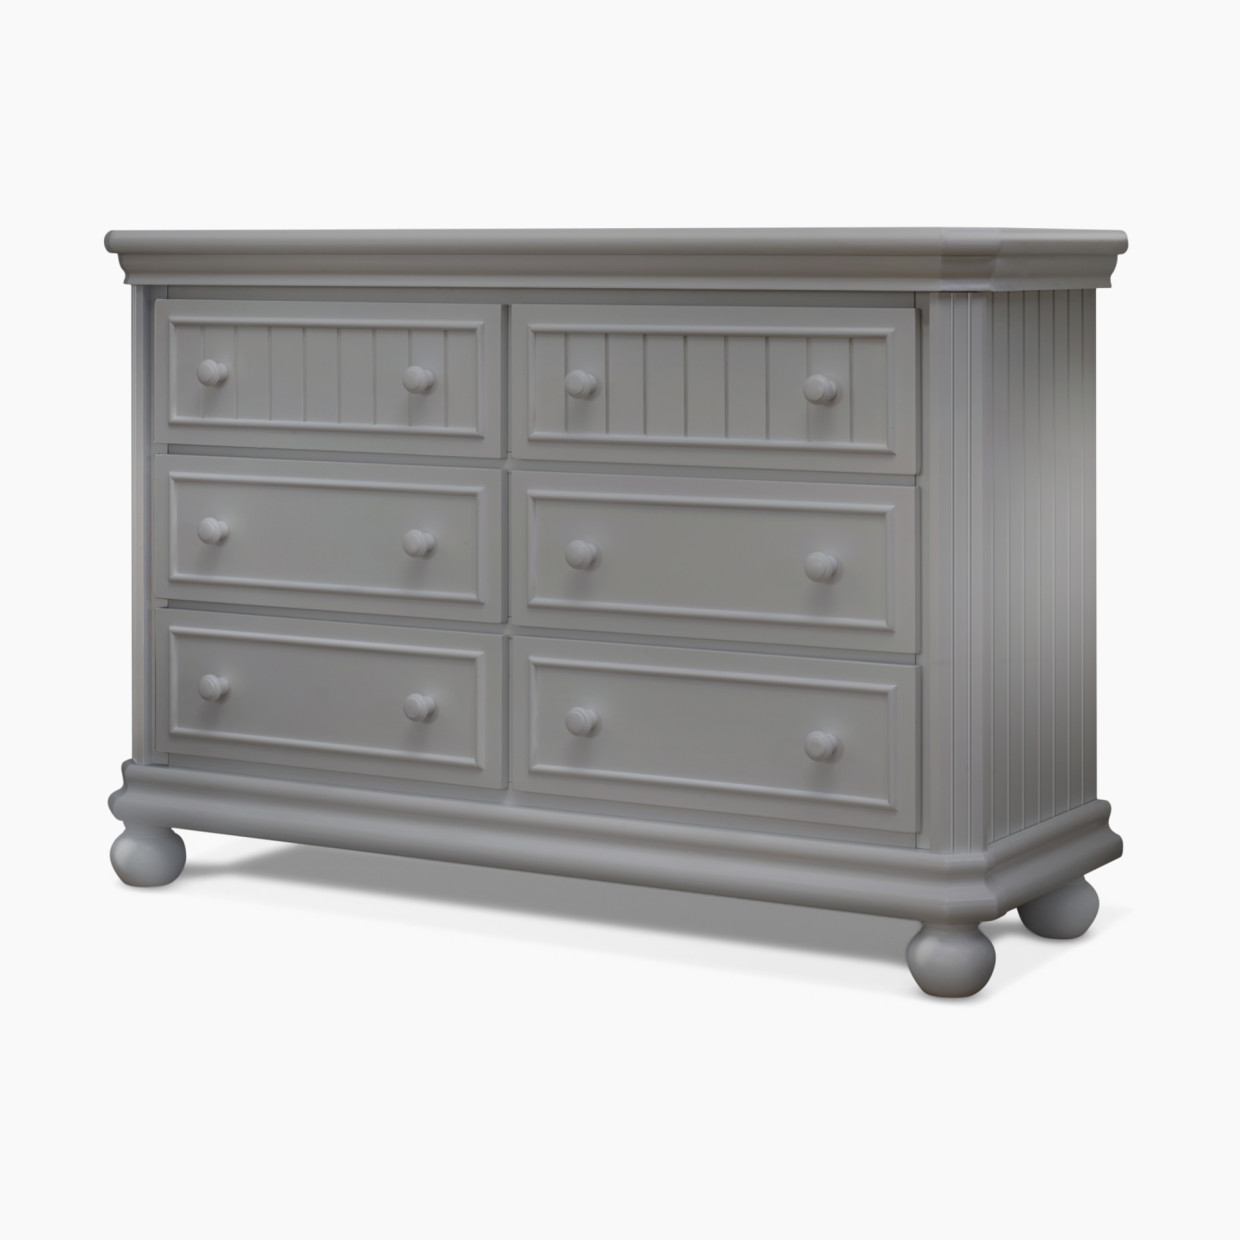 Sorelle Finley 6 Drawer Double Dresser - Weathered Gray.